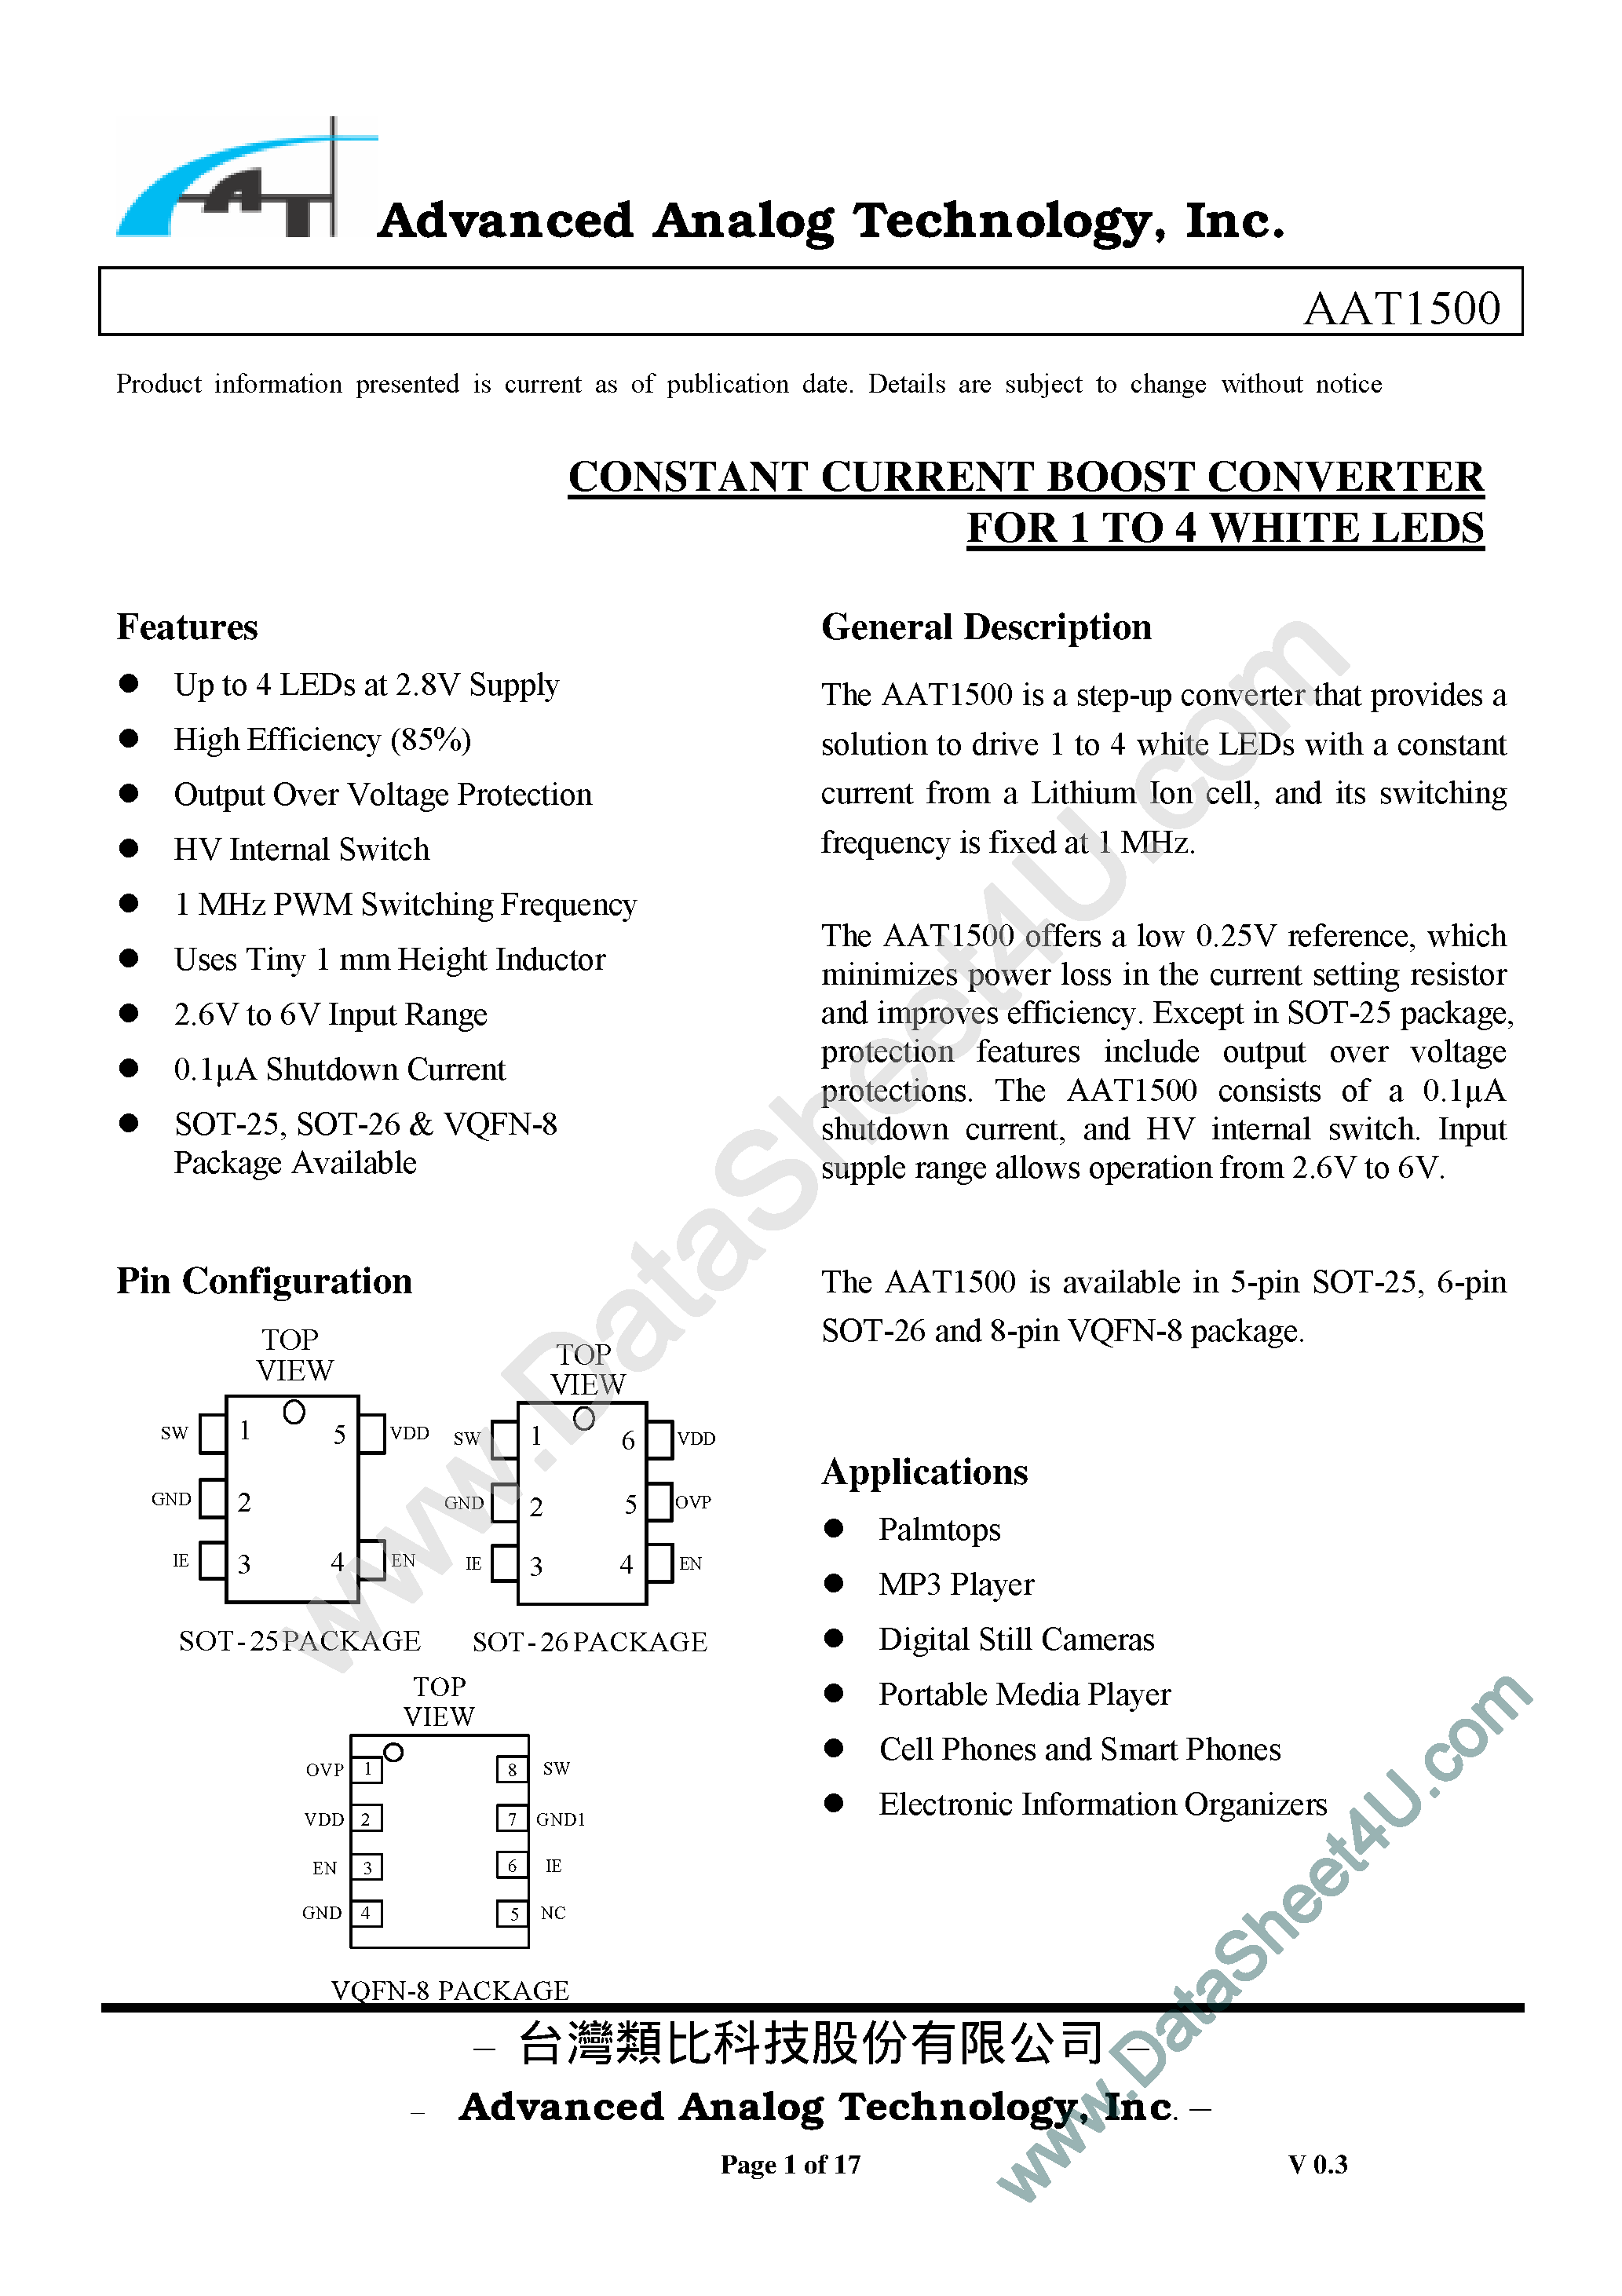 Datasheet AAT1500 - CONSTANT CURRENT BOOST CONVERTER FOR 1 TO 4 WHITE LEDS page 1